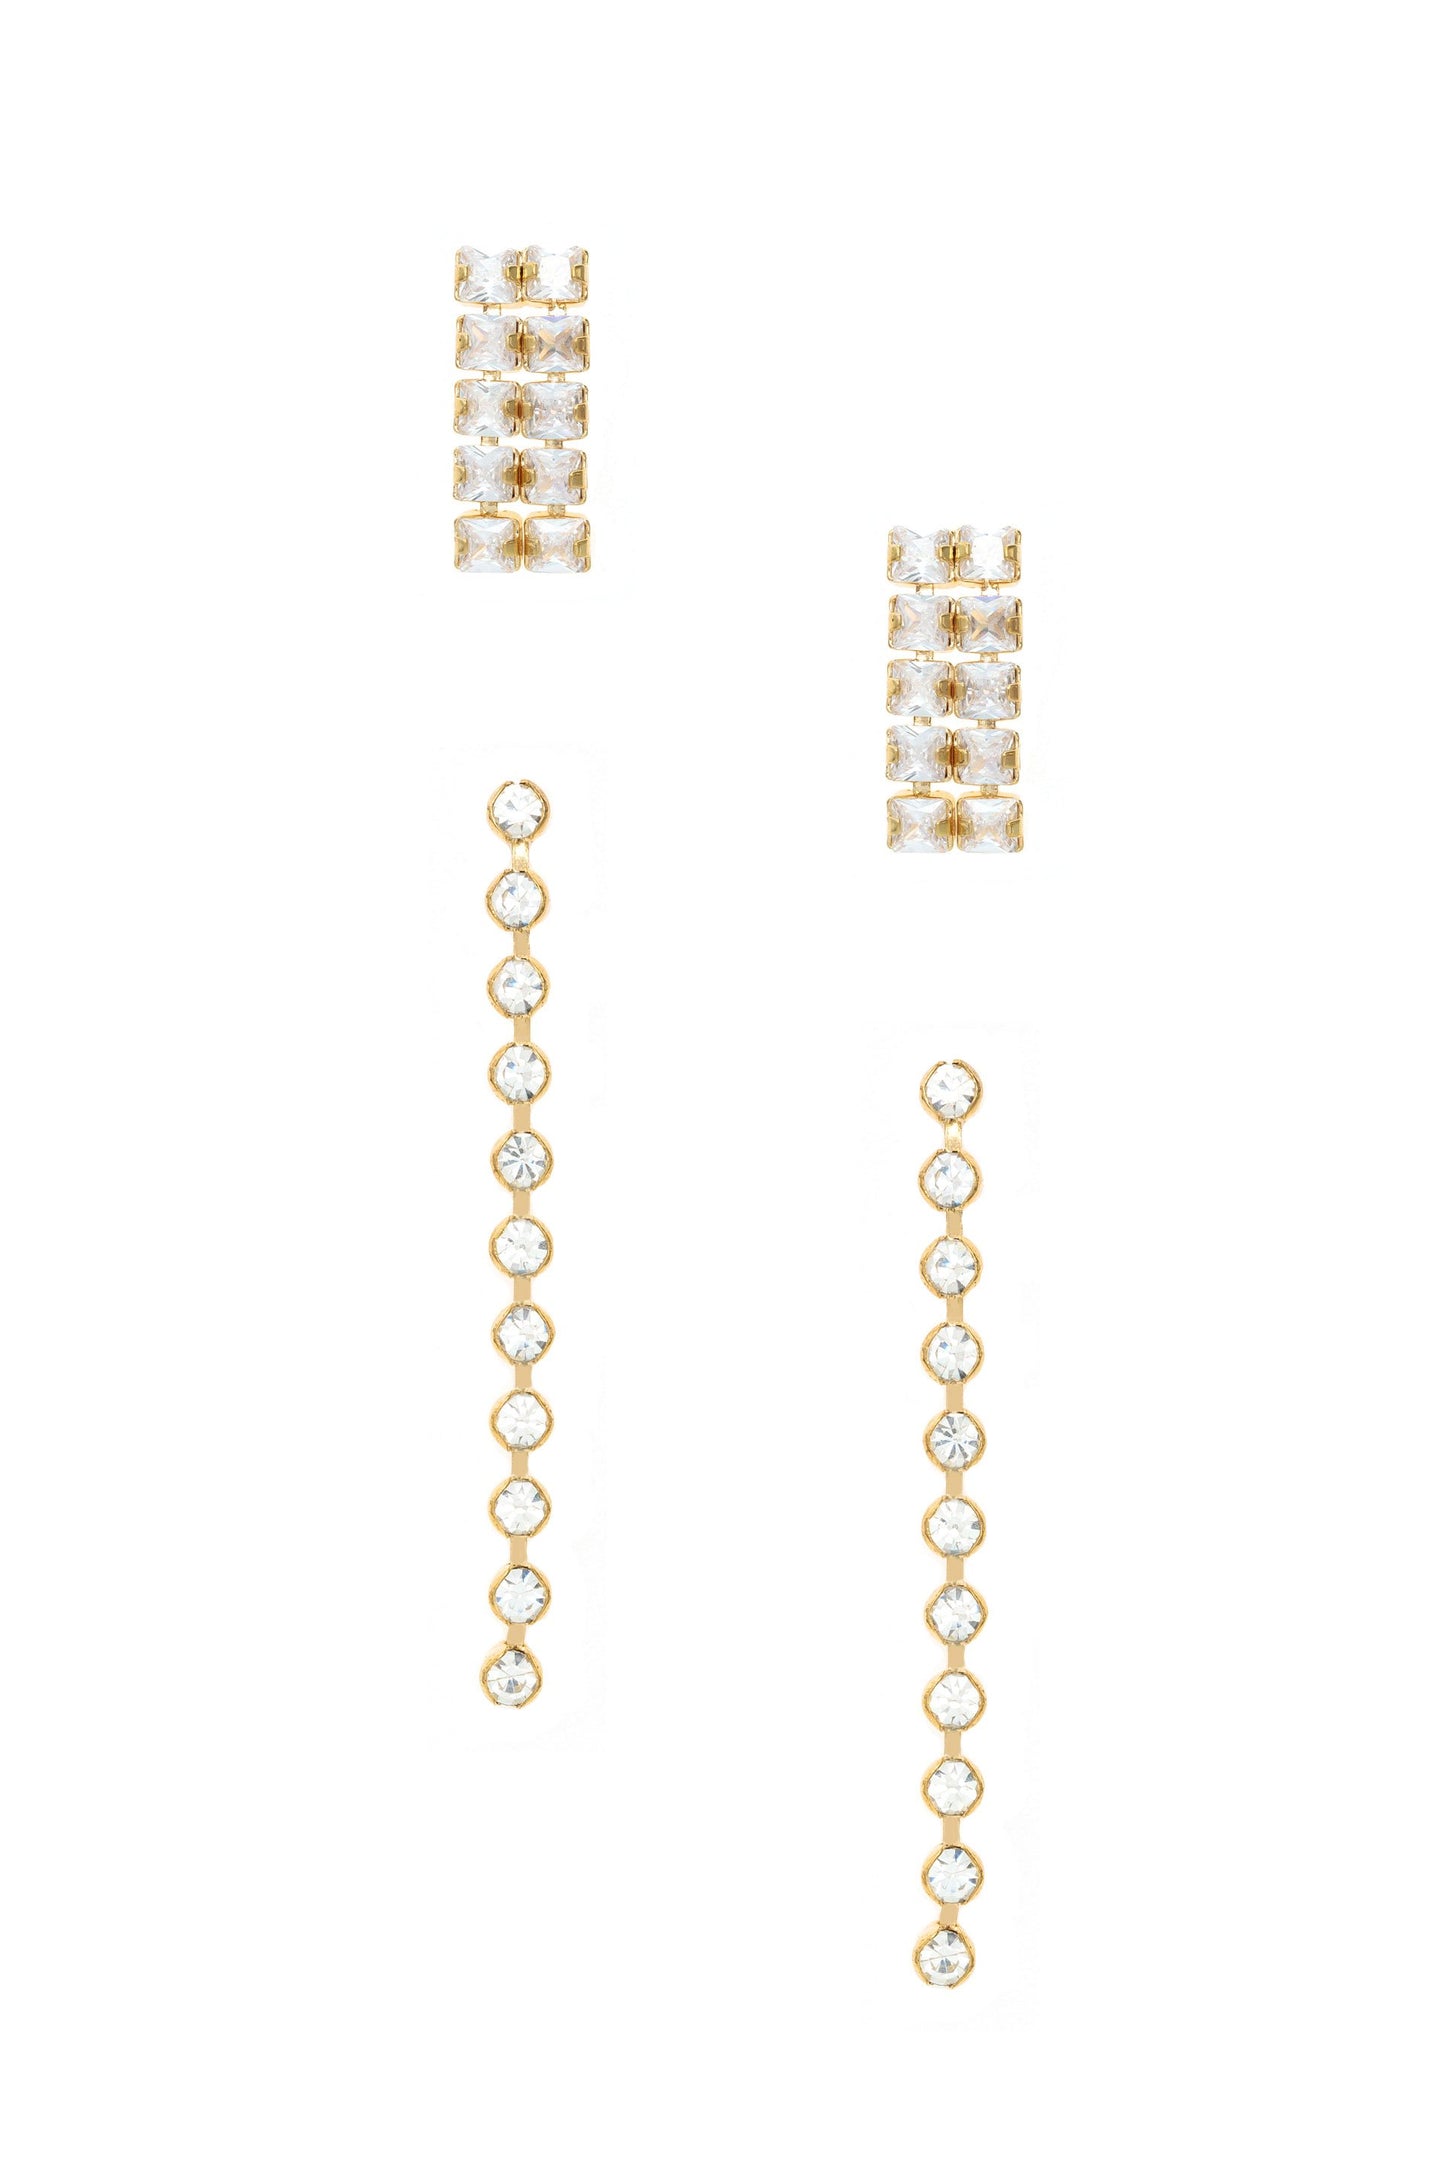 Crystal Sisters 18k Gold Plated Earring Set on white background